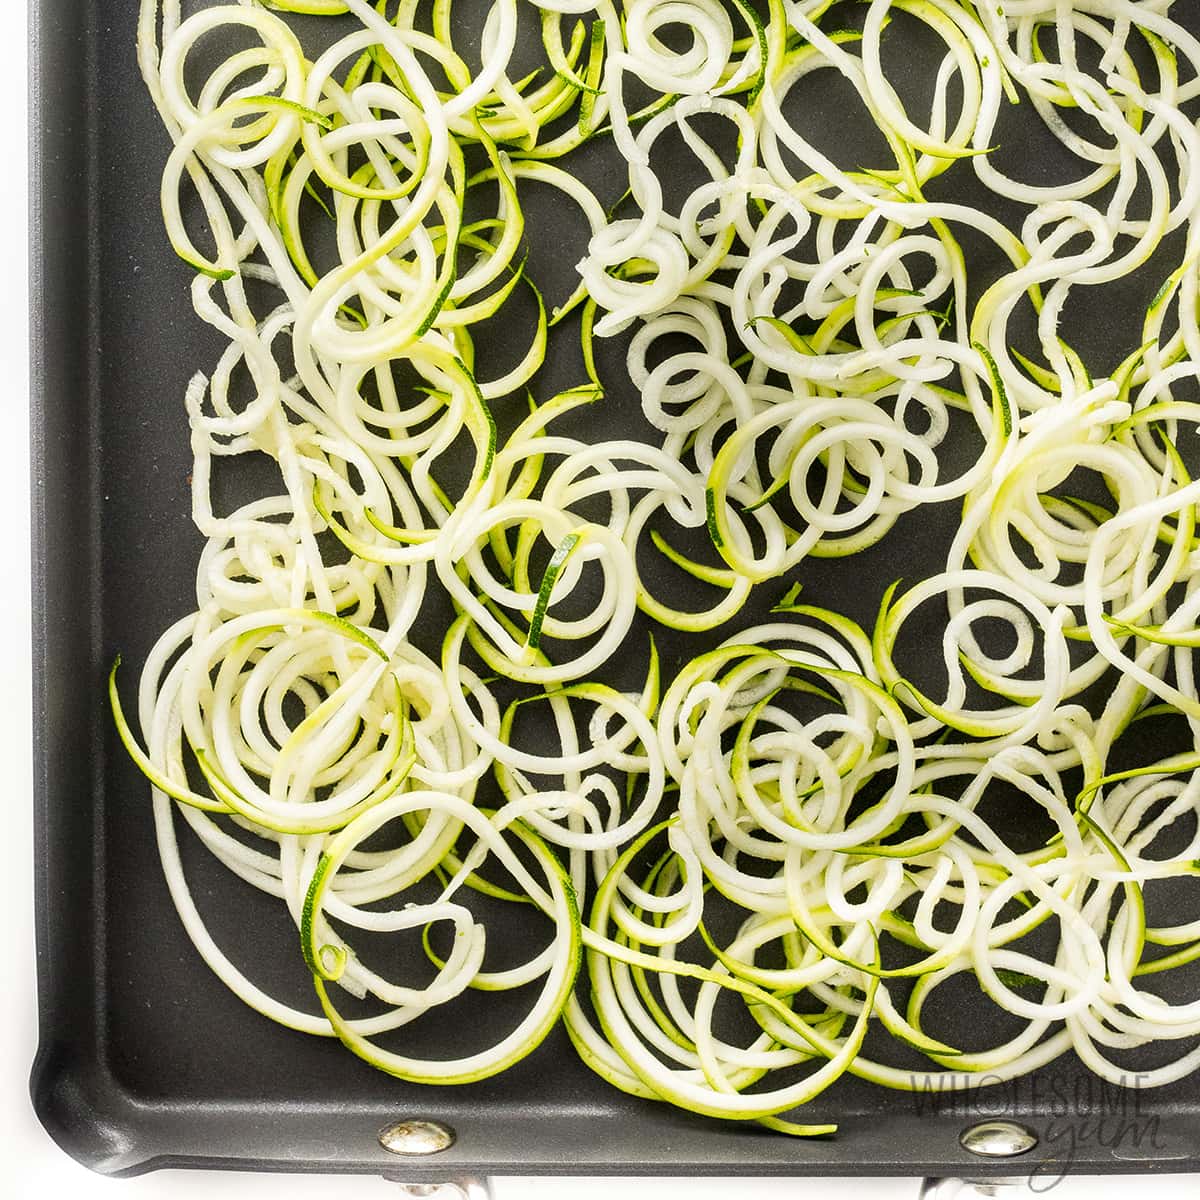 Raw zoodles on a baking sheet.